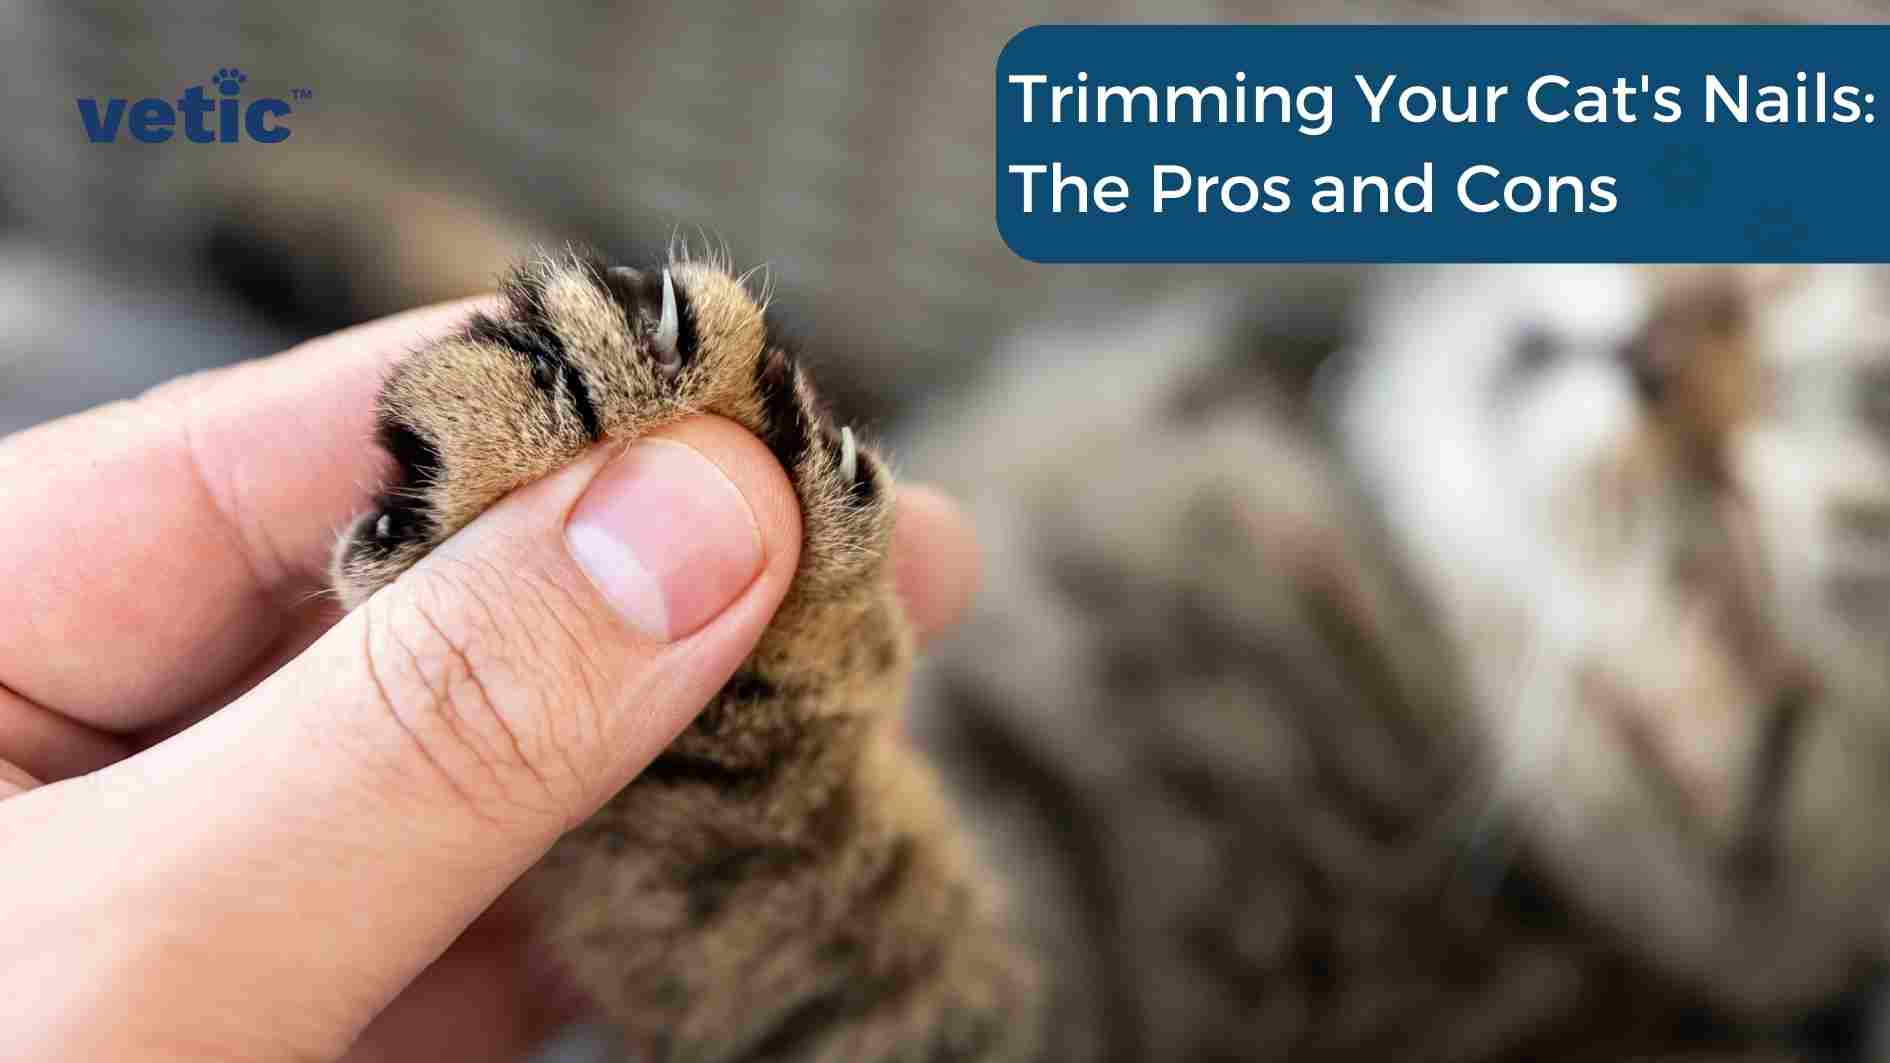 How to Trim Your Cat's Nails - YouTube